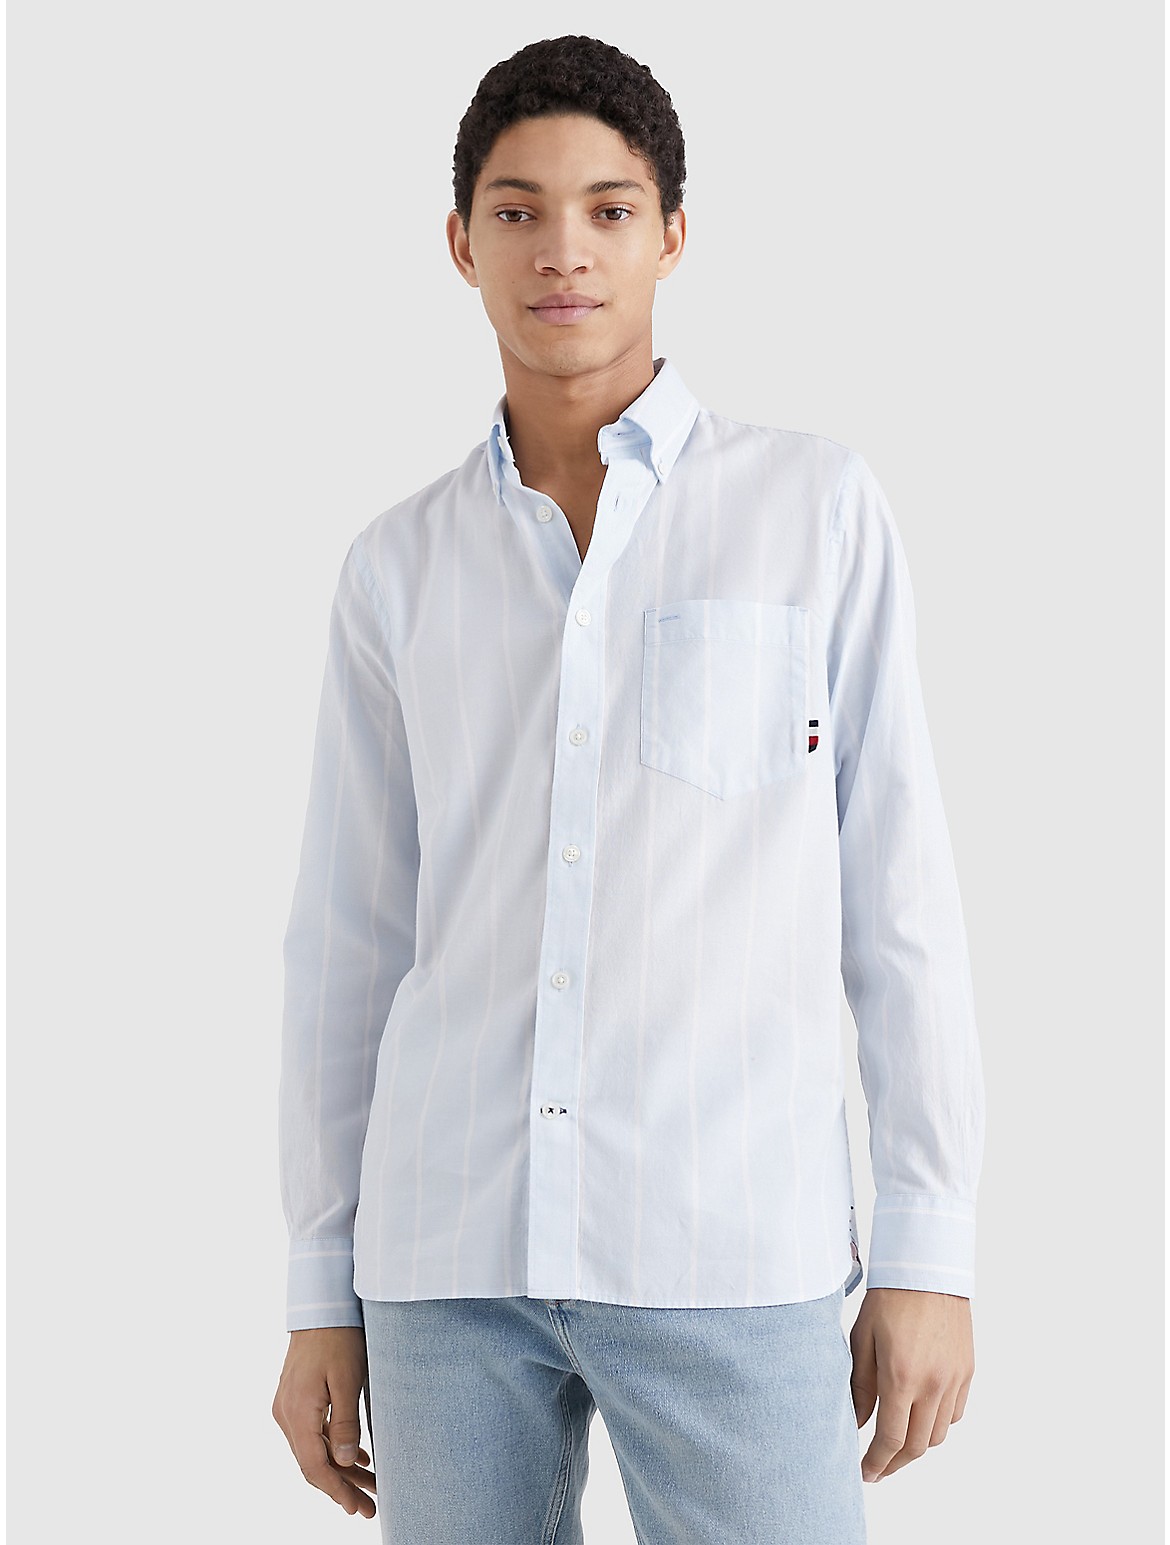 Regular | / ModeSens In Hilfiger Oxford Breezy Fit Optic Shirt Tommy White Blue Striped